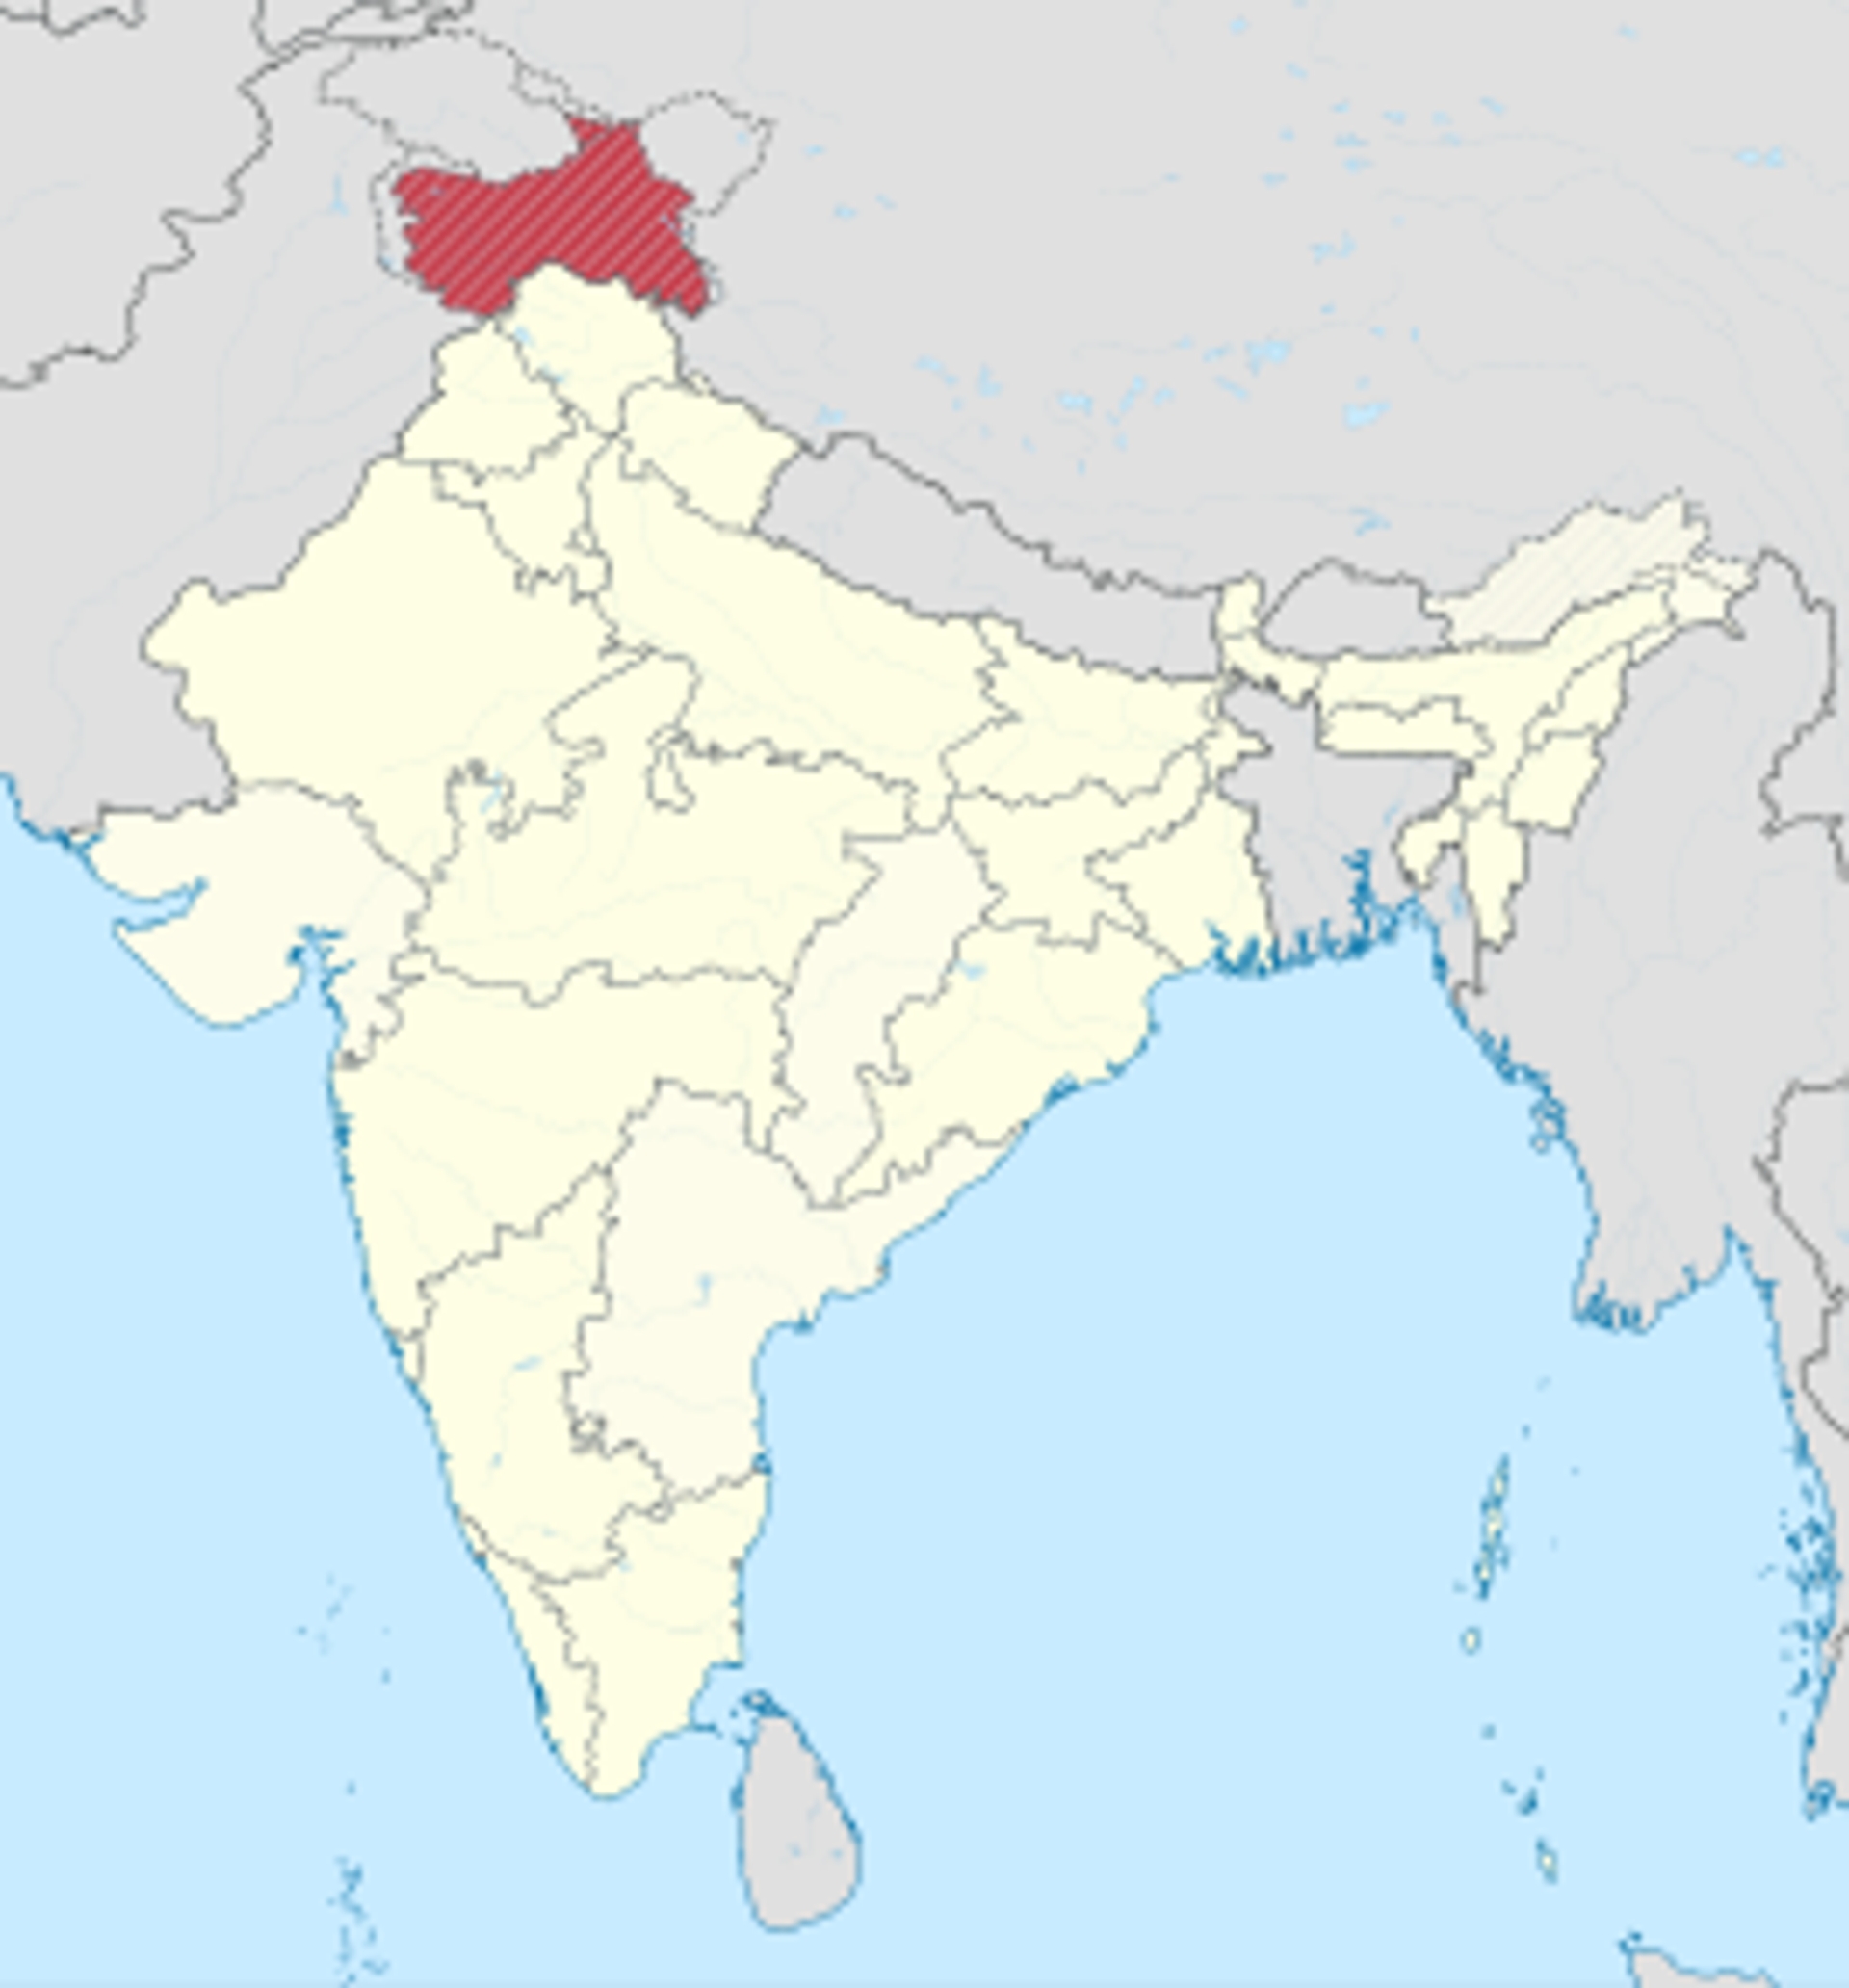 266px-Jammu_and_Kashmir_in_India_de-facto_disputed_hatched.svg_